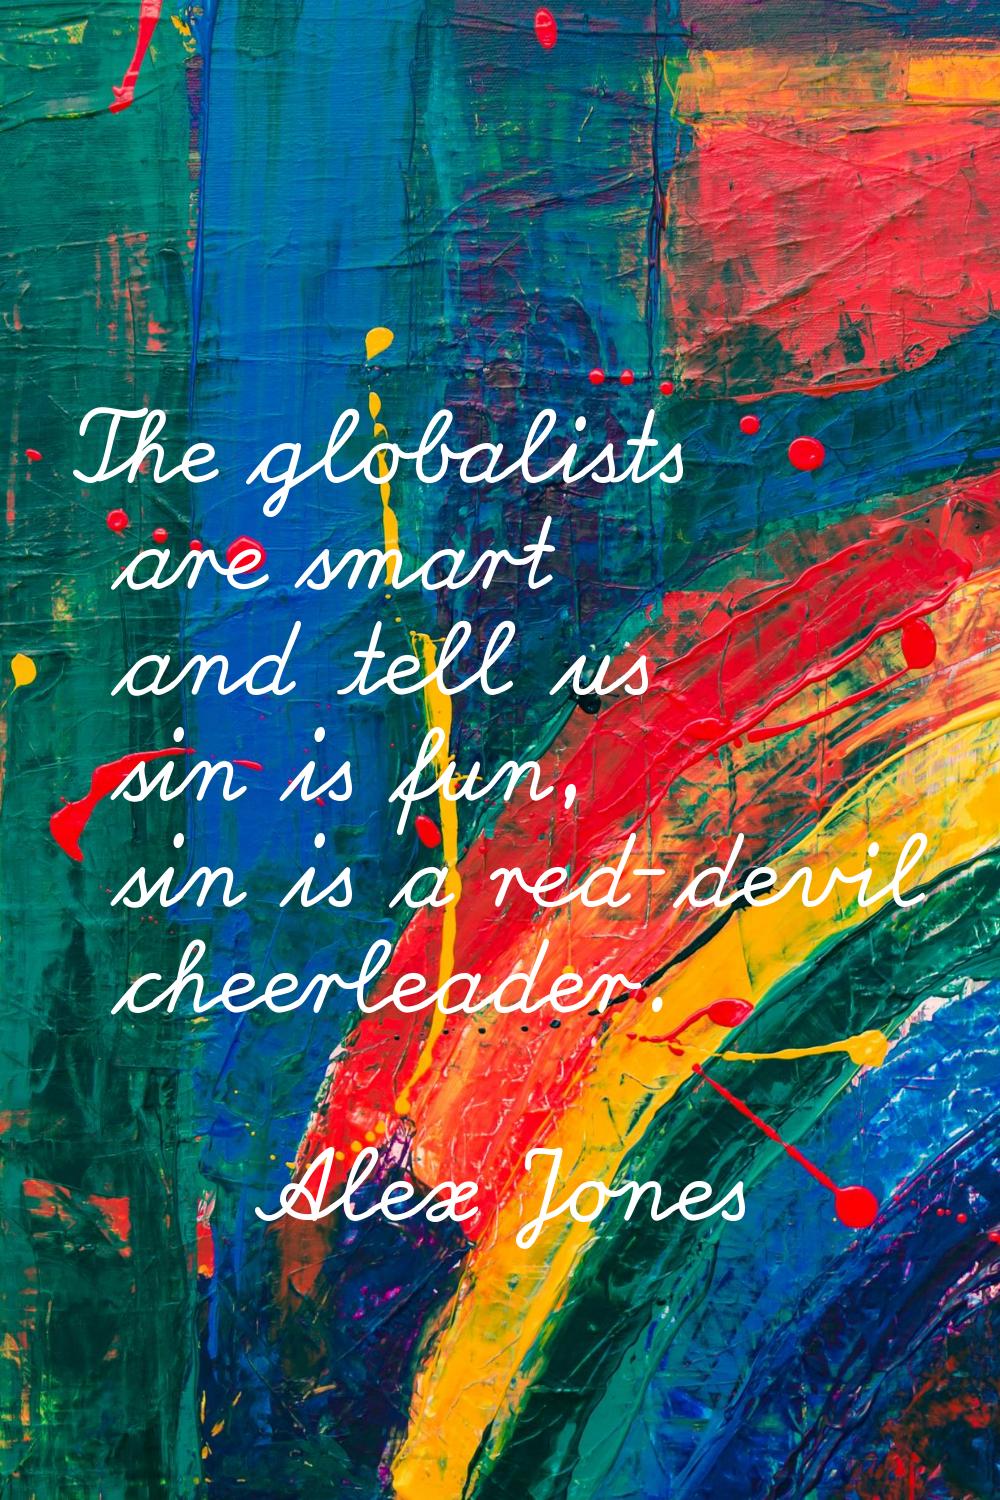 The globalists are smart and tell us sin is fun, sin is a red-devil cheerleader.